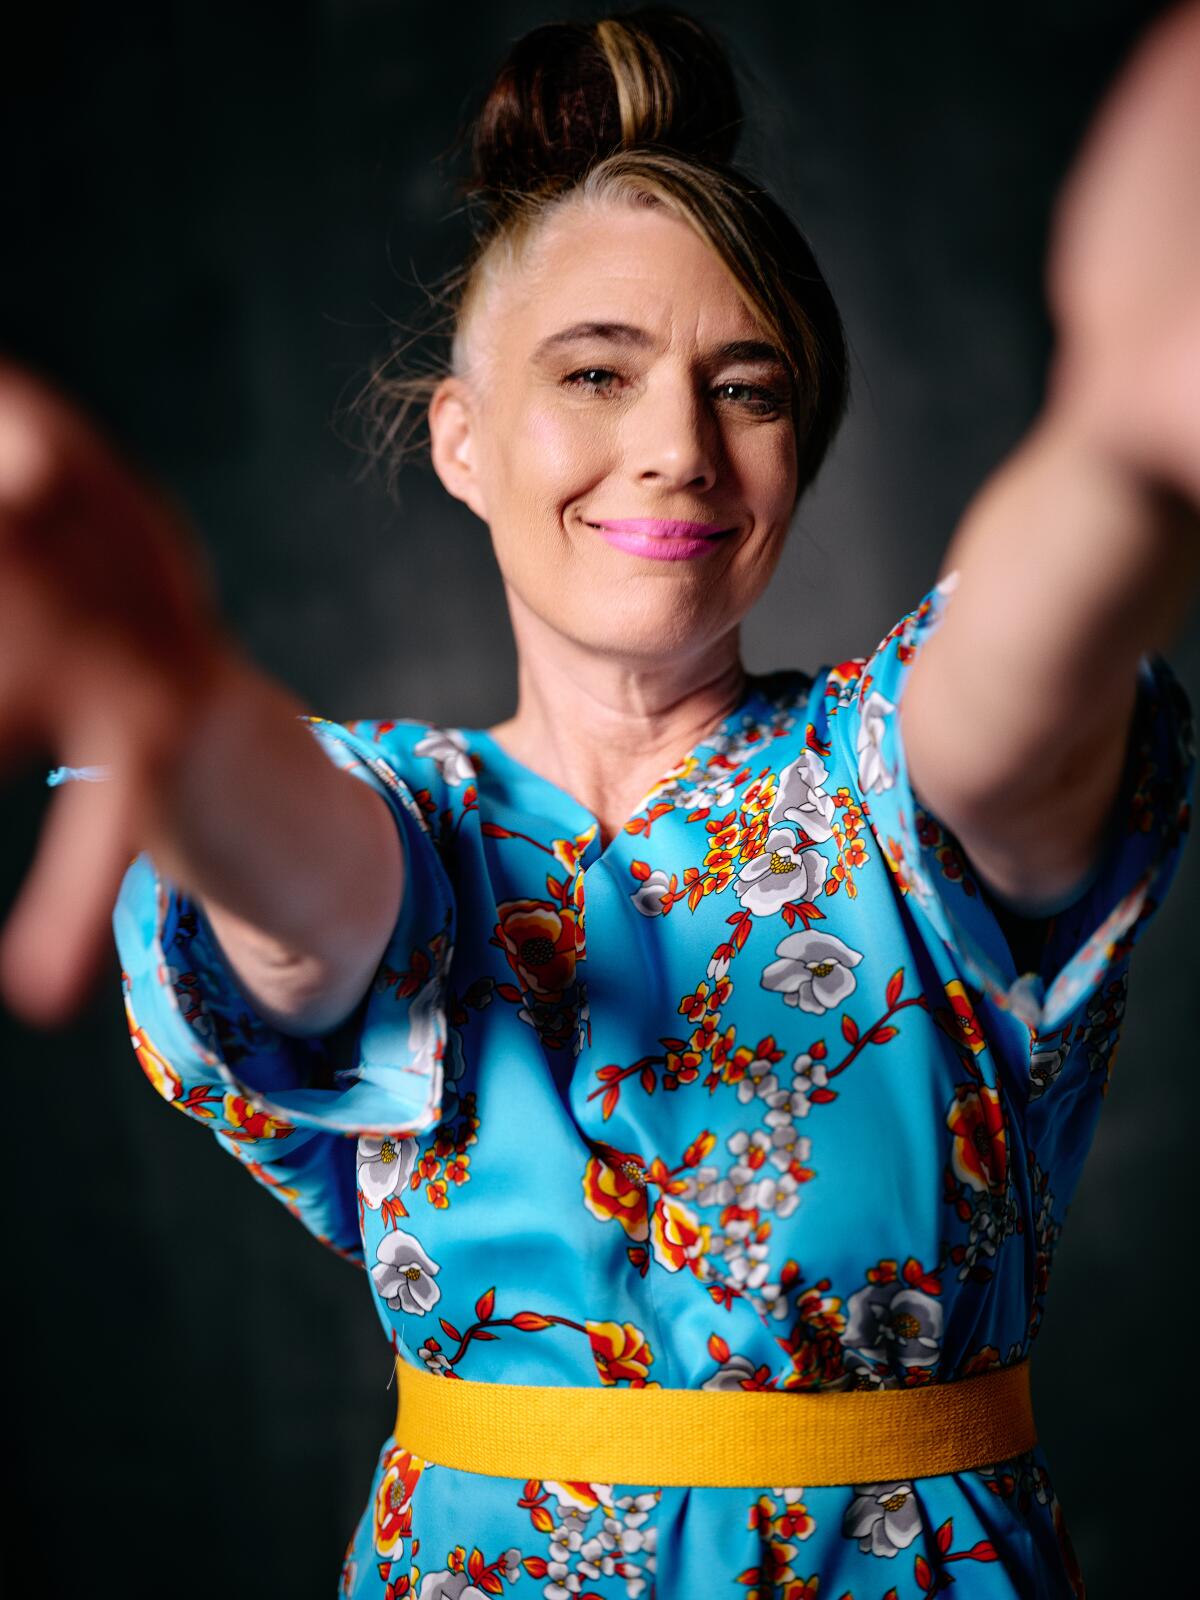 Kathleen Hanna, with pink lipstick, her hair in a bun and wearing a blue floral dress, extends her arms.